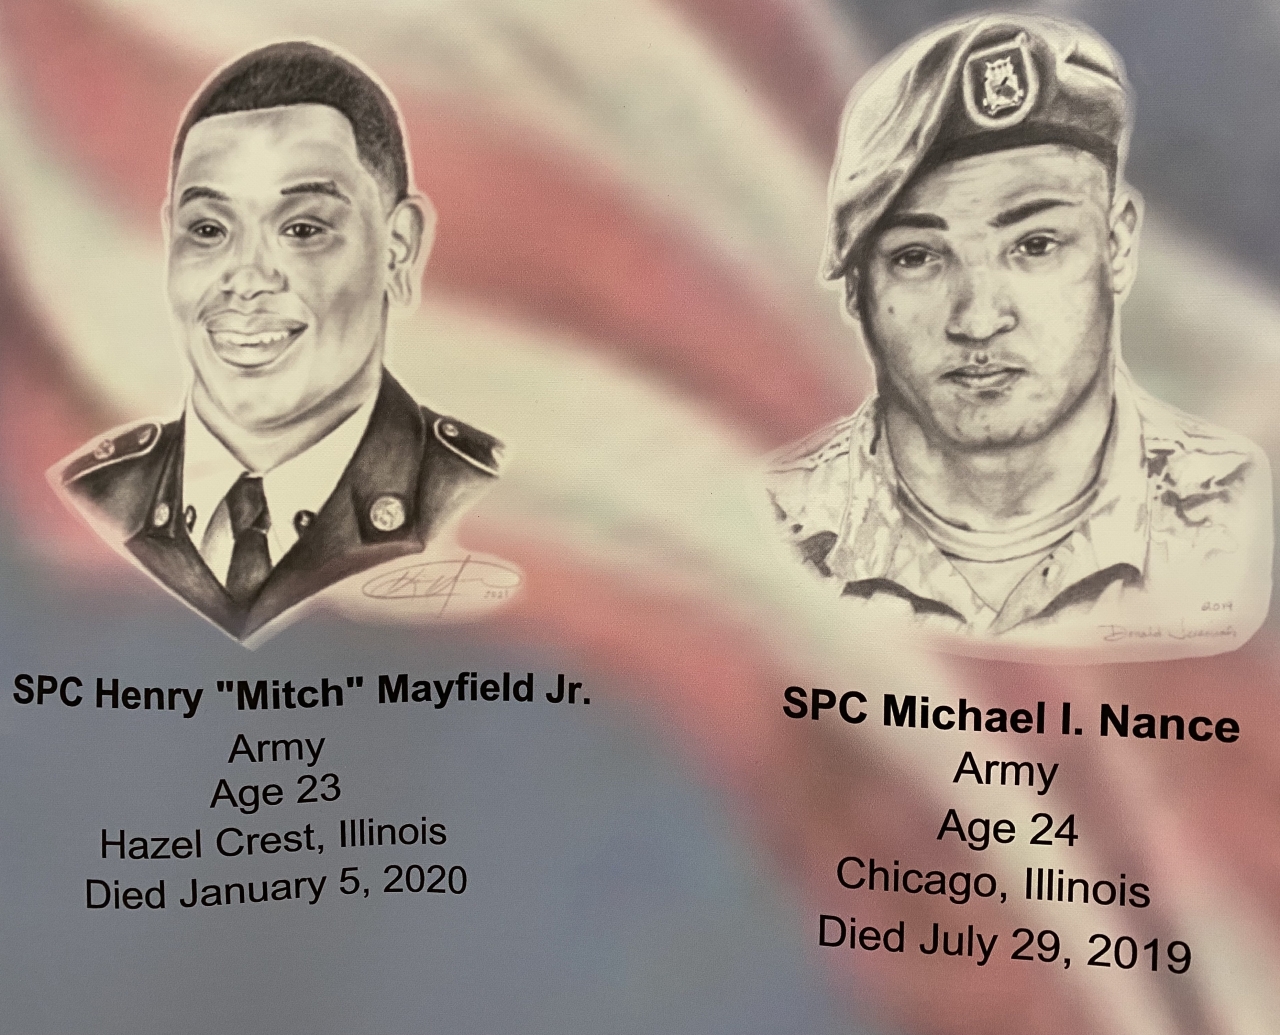 Image of SPC Henry "Mitch" Mayfield Jr., Army, Age 23, Hazel Crest, Illinois, Died January 5, 2020 and SPC Michael L. Nance, Army, Age 24, Chicago, Illinois, Died July 29, 2019